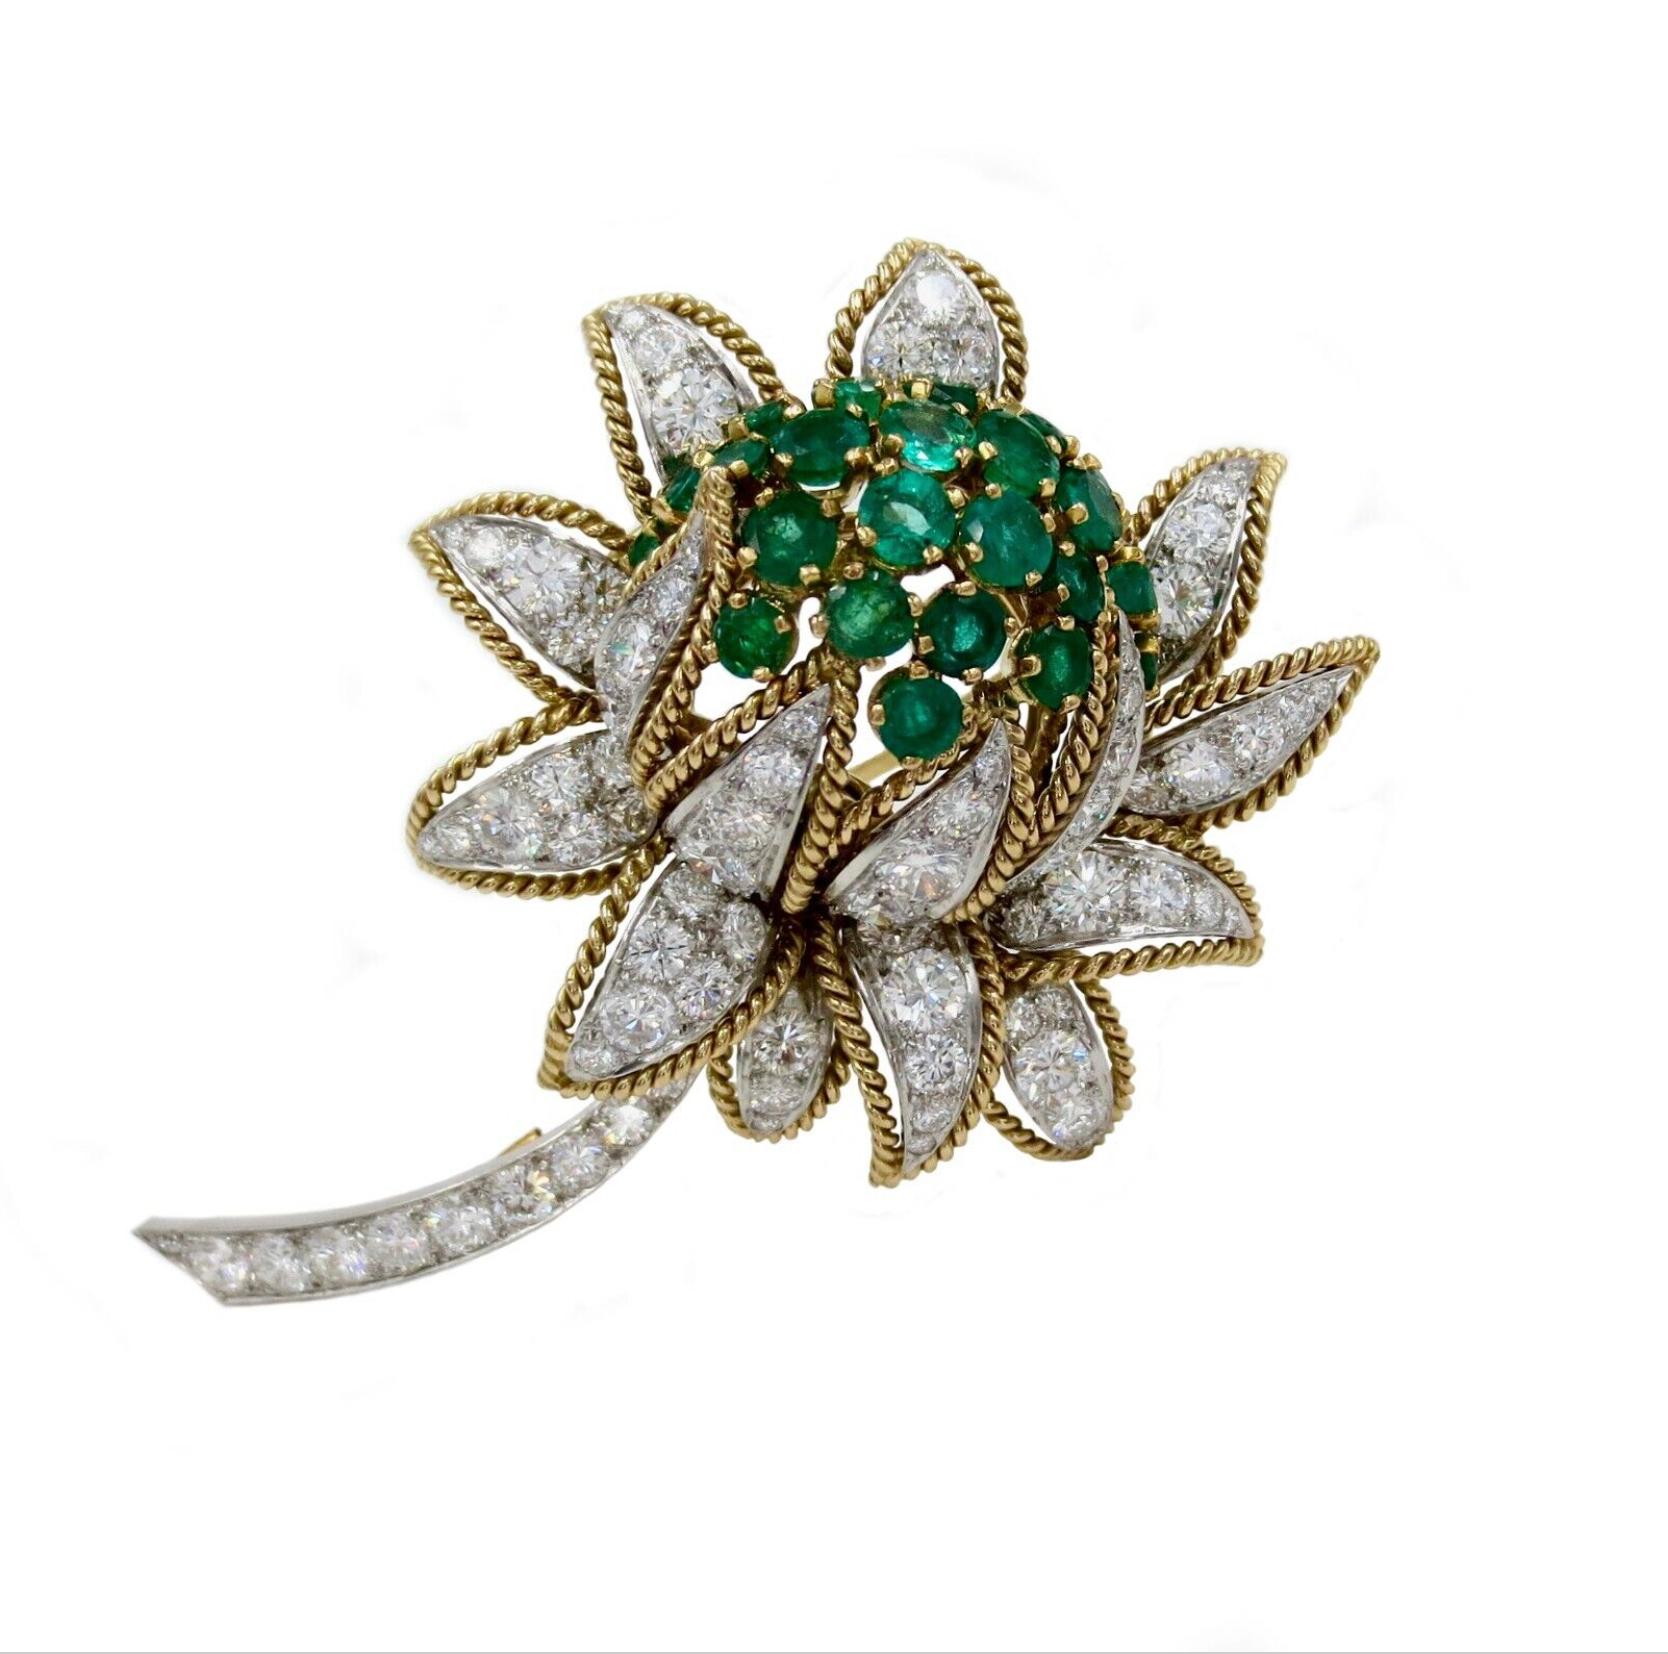 This stunning, 1960-1970's diamond and emerald earrings and brooch set by Vourakis is crafted in 18k white and yellow gold.

Brooch is design as a blooming flower on the stem, encrusted with approx. 7.15ct. diamonds, 3.20ct. emeralds and accented